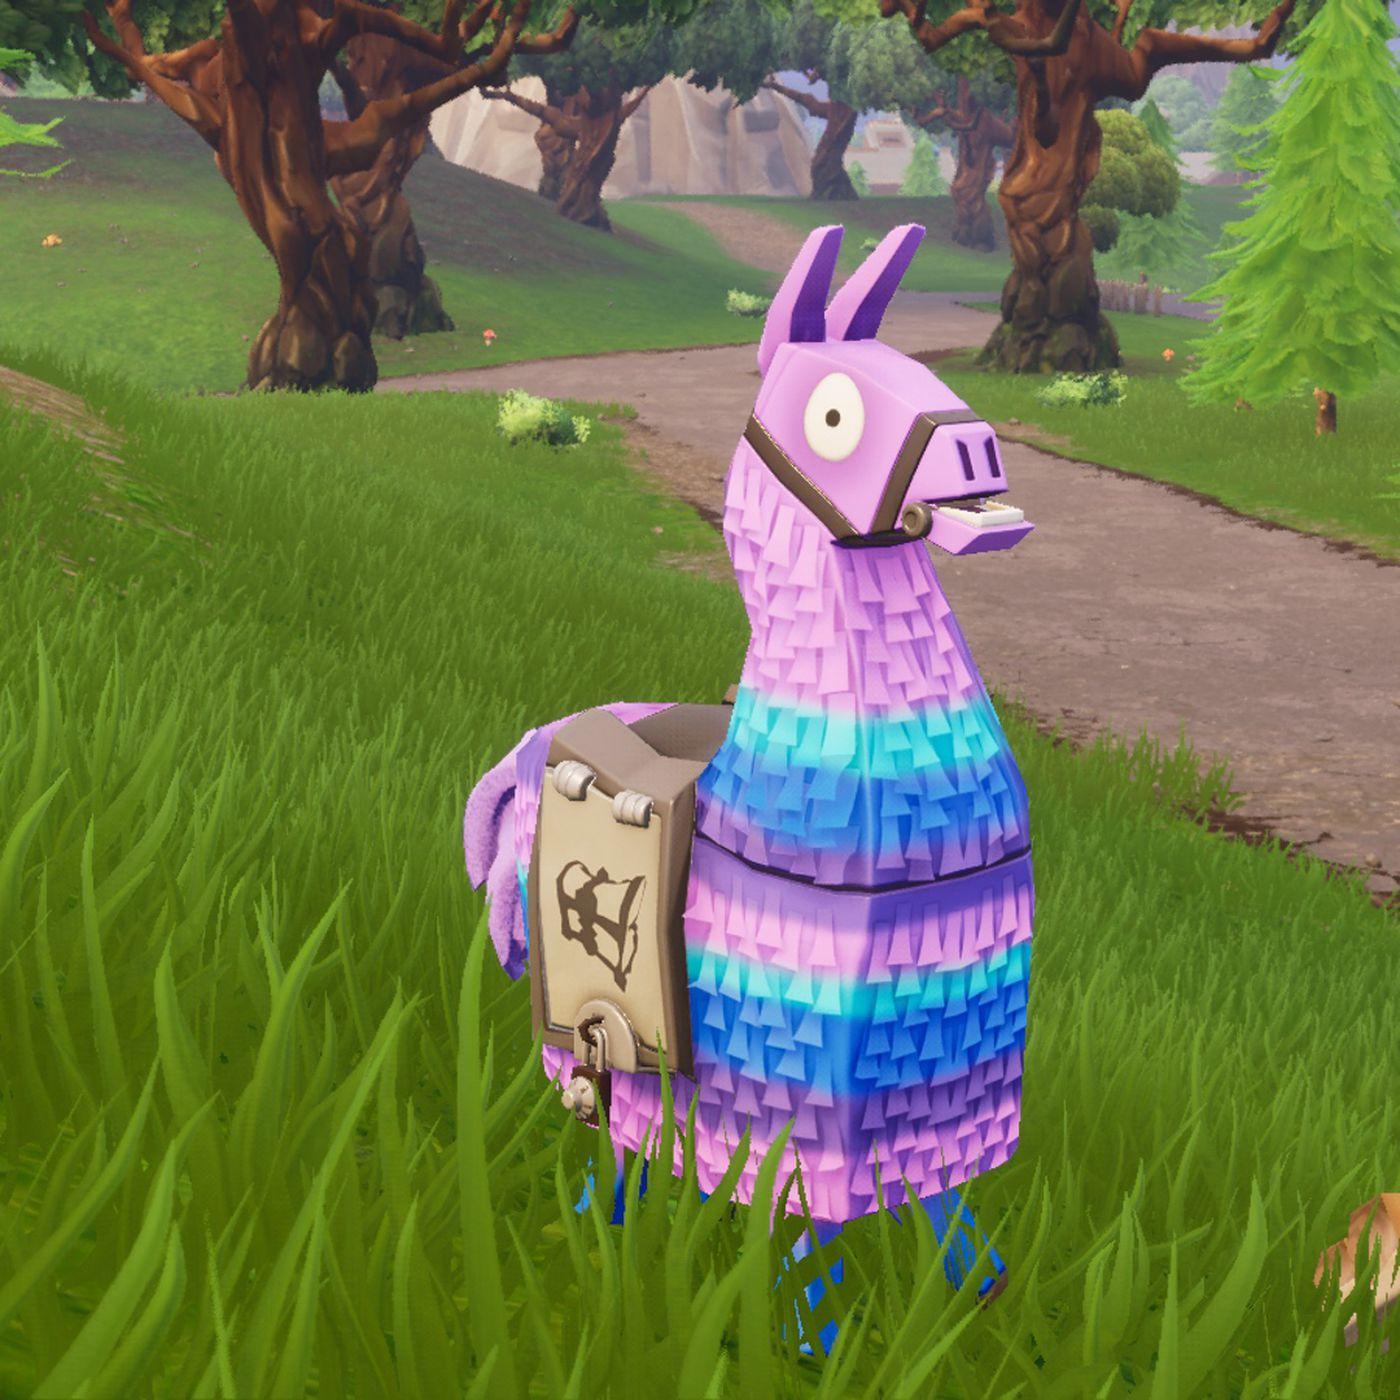 Llamas and buildings got nerfed in Fortnite's latest update